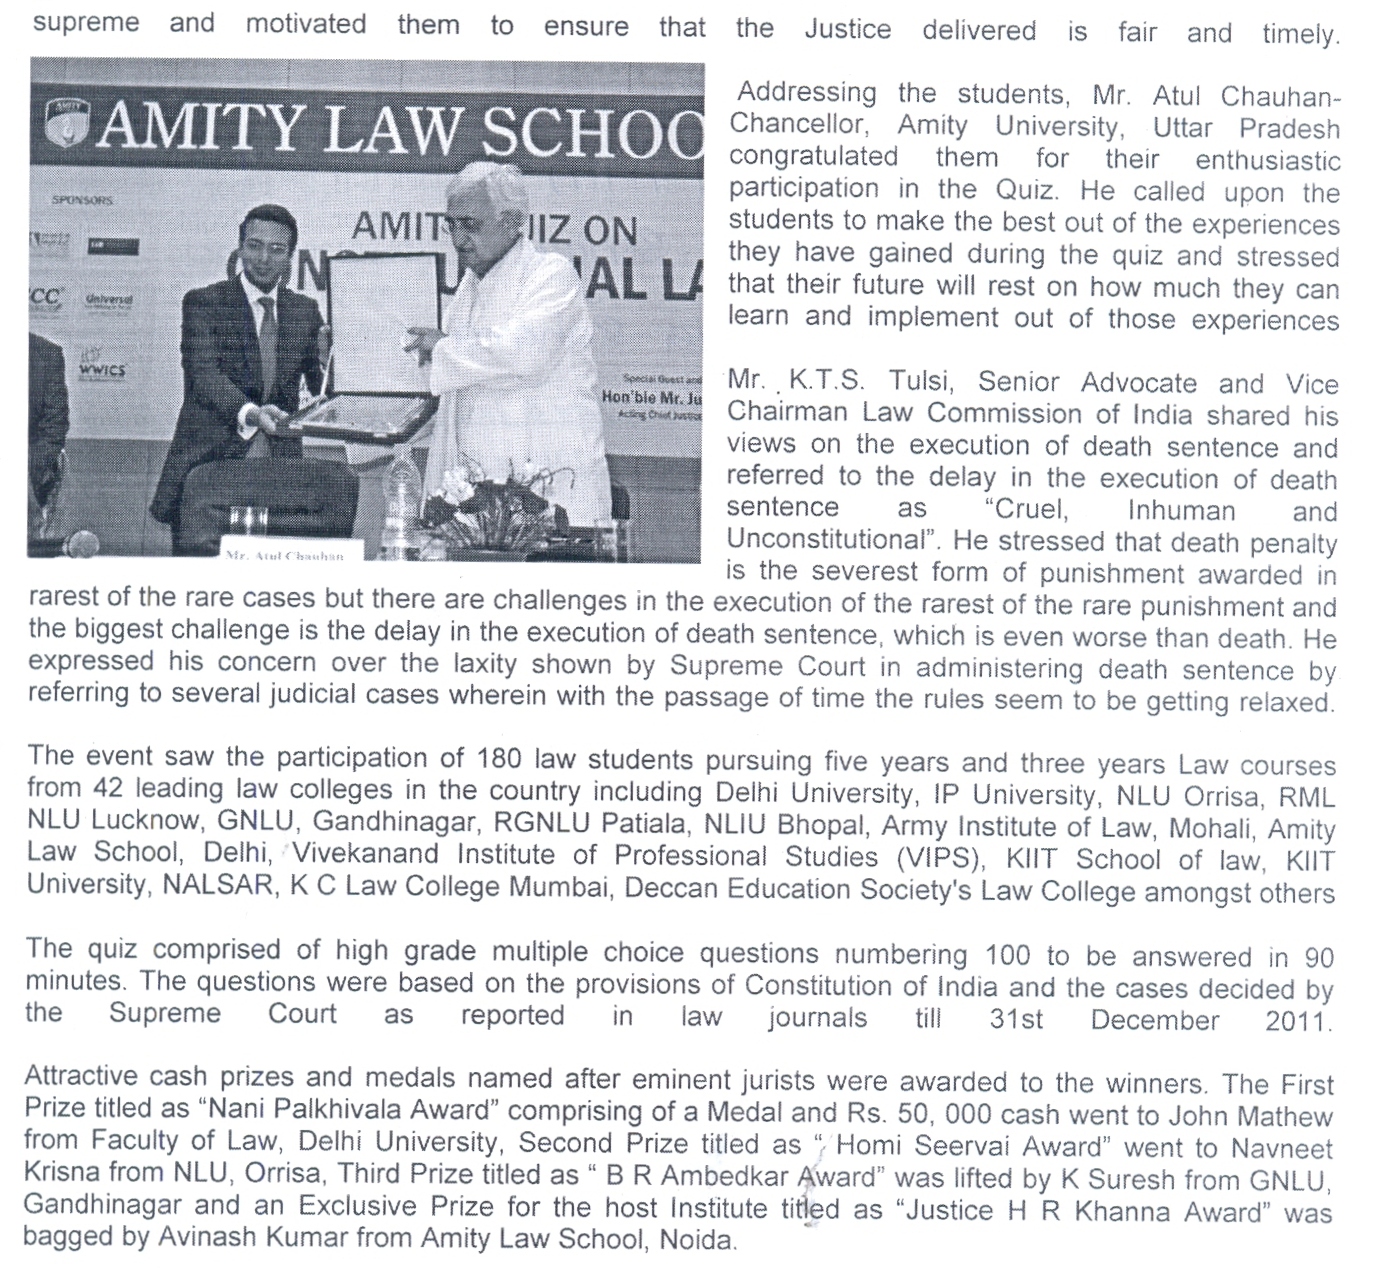 Mr Salman Khurshid felicitates winners of Quiz Competition on Constitutional Law at Amity University